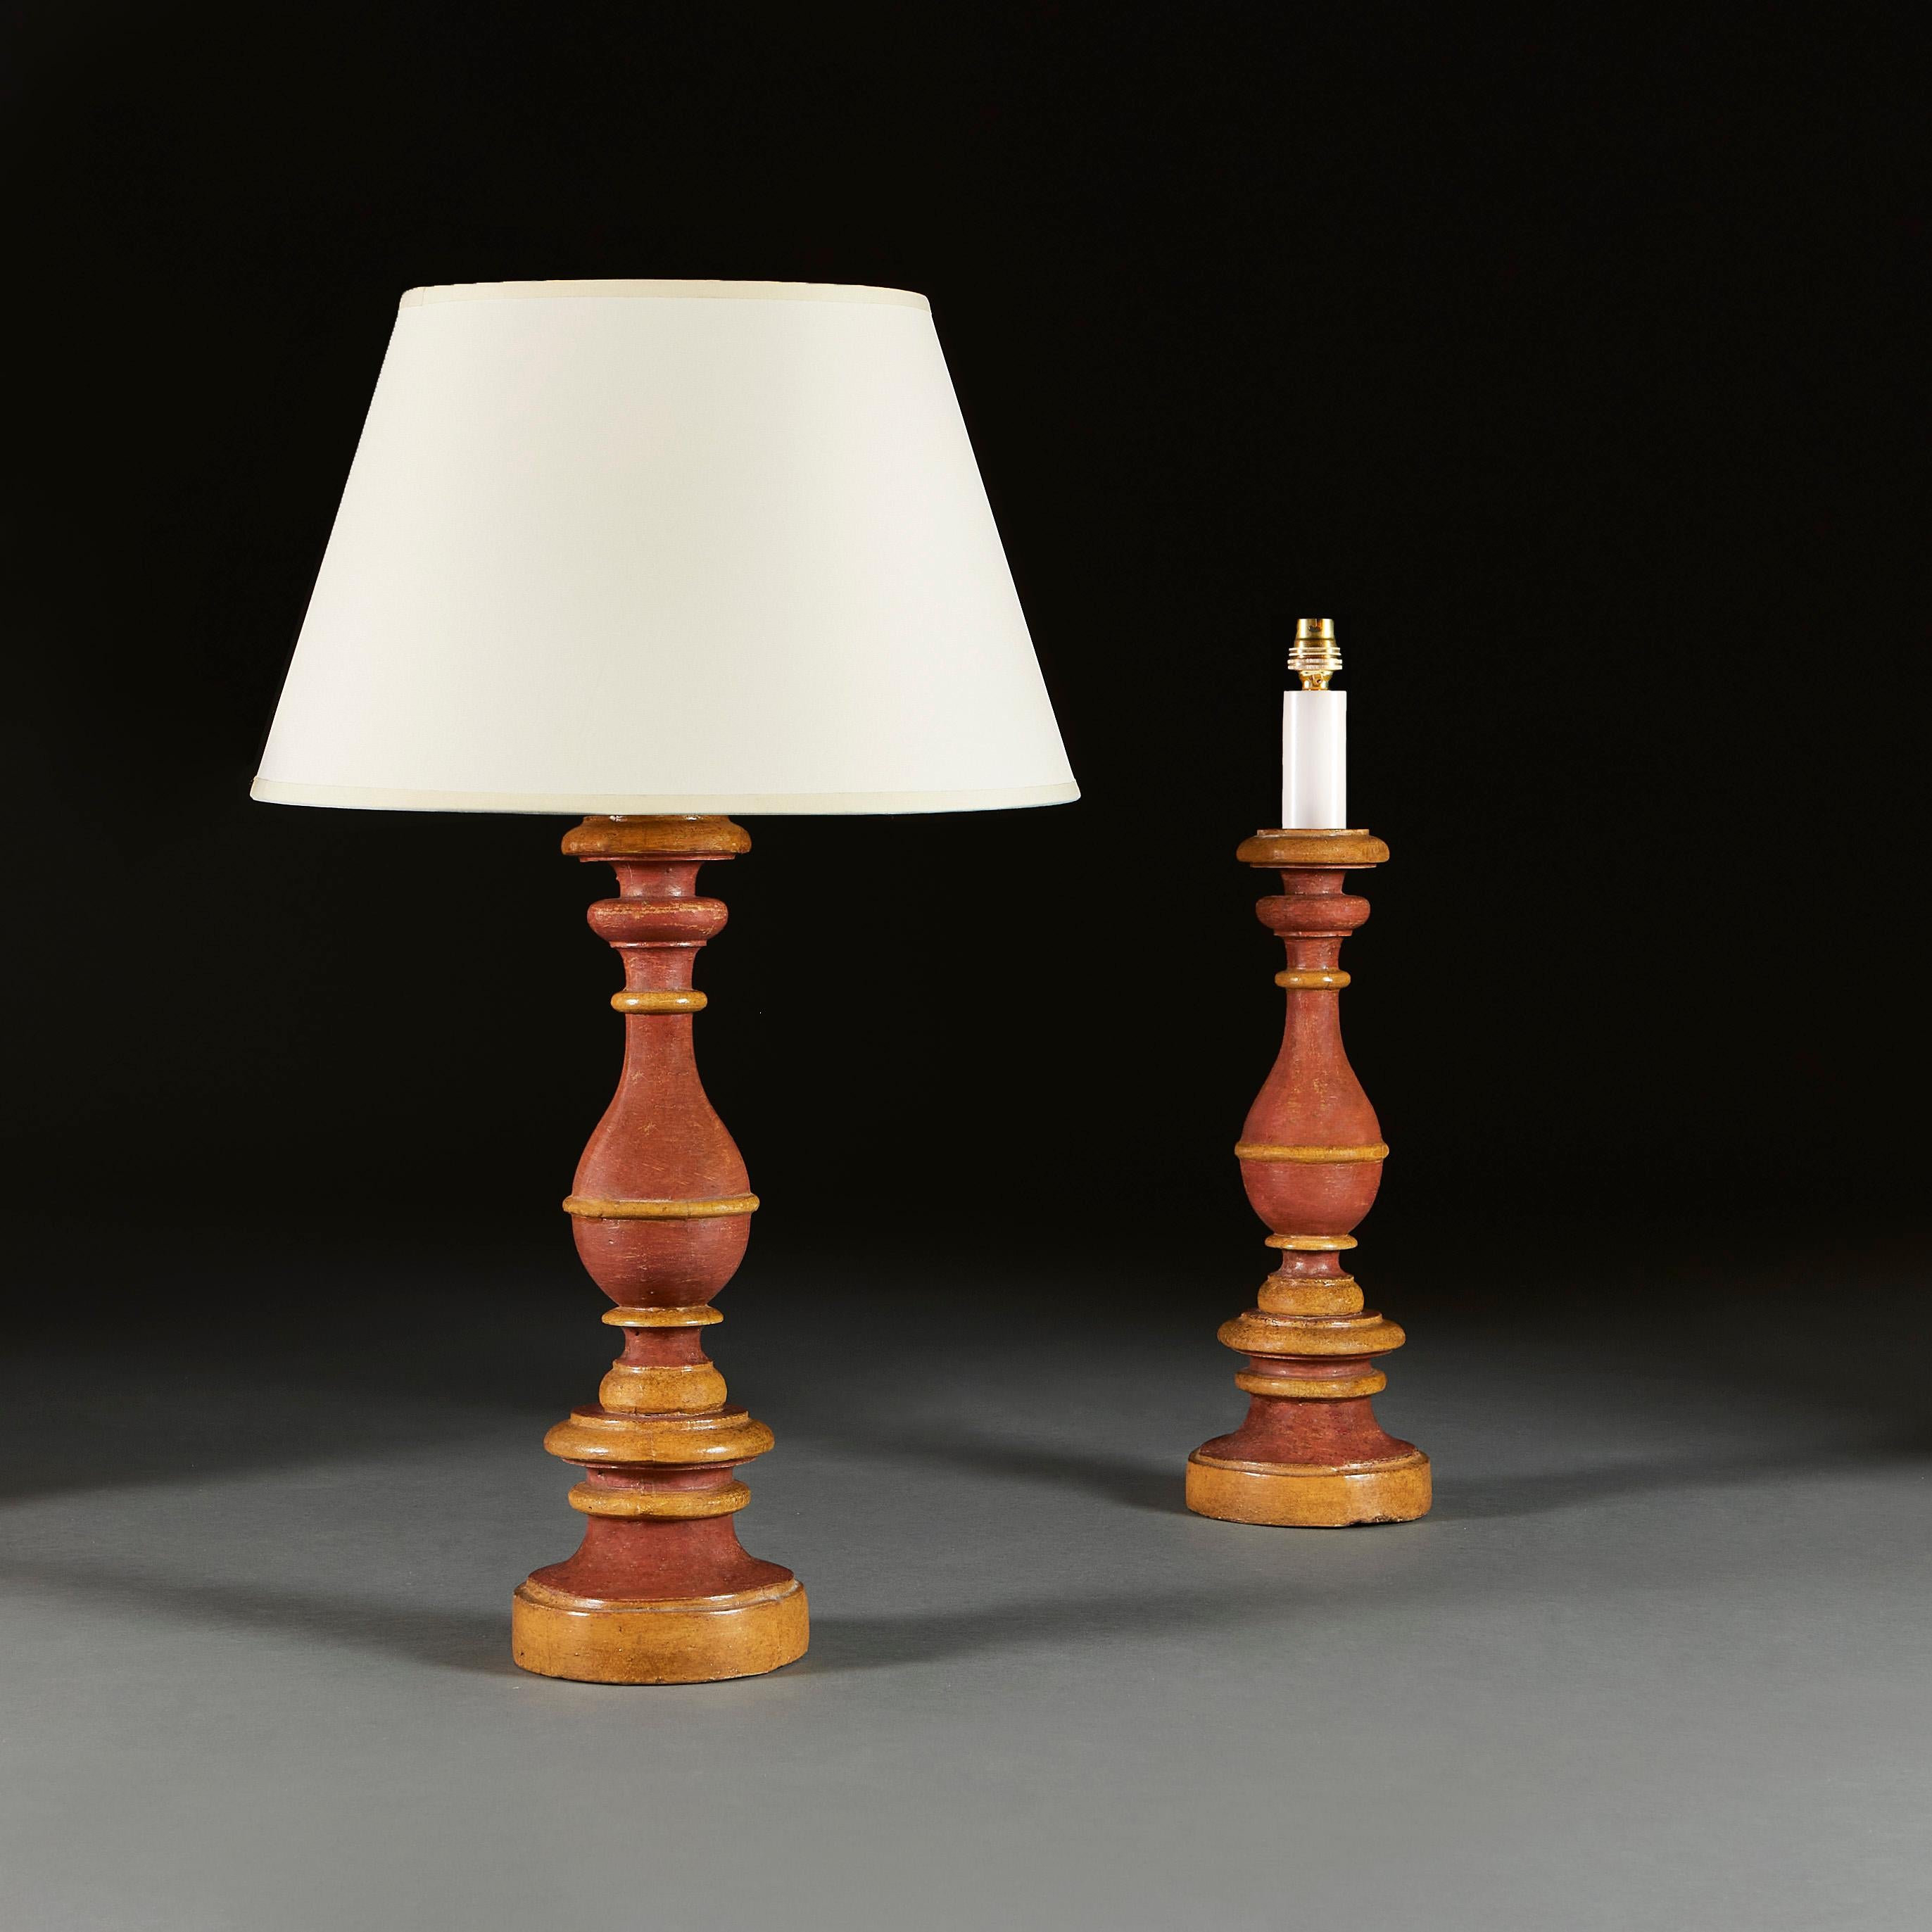 Italy, circa 1900

A good pair of turned baluster candlesticks painted in subtle tones of amber and coral, supported on cylindrical bases, now converted as lamps.

Height of candlestick 42.00cm
Height with lampshade 67.00cm
Diameter of base